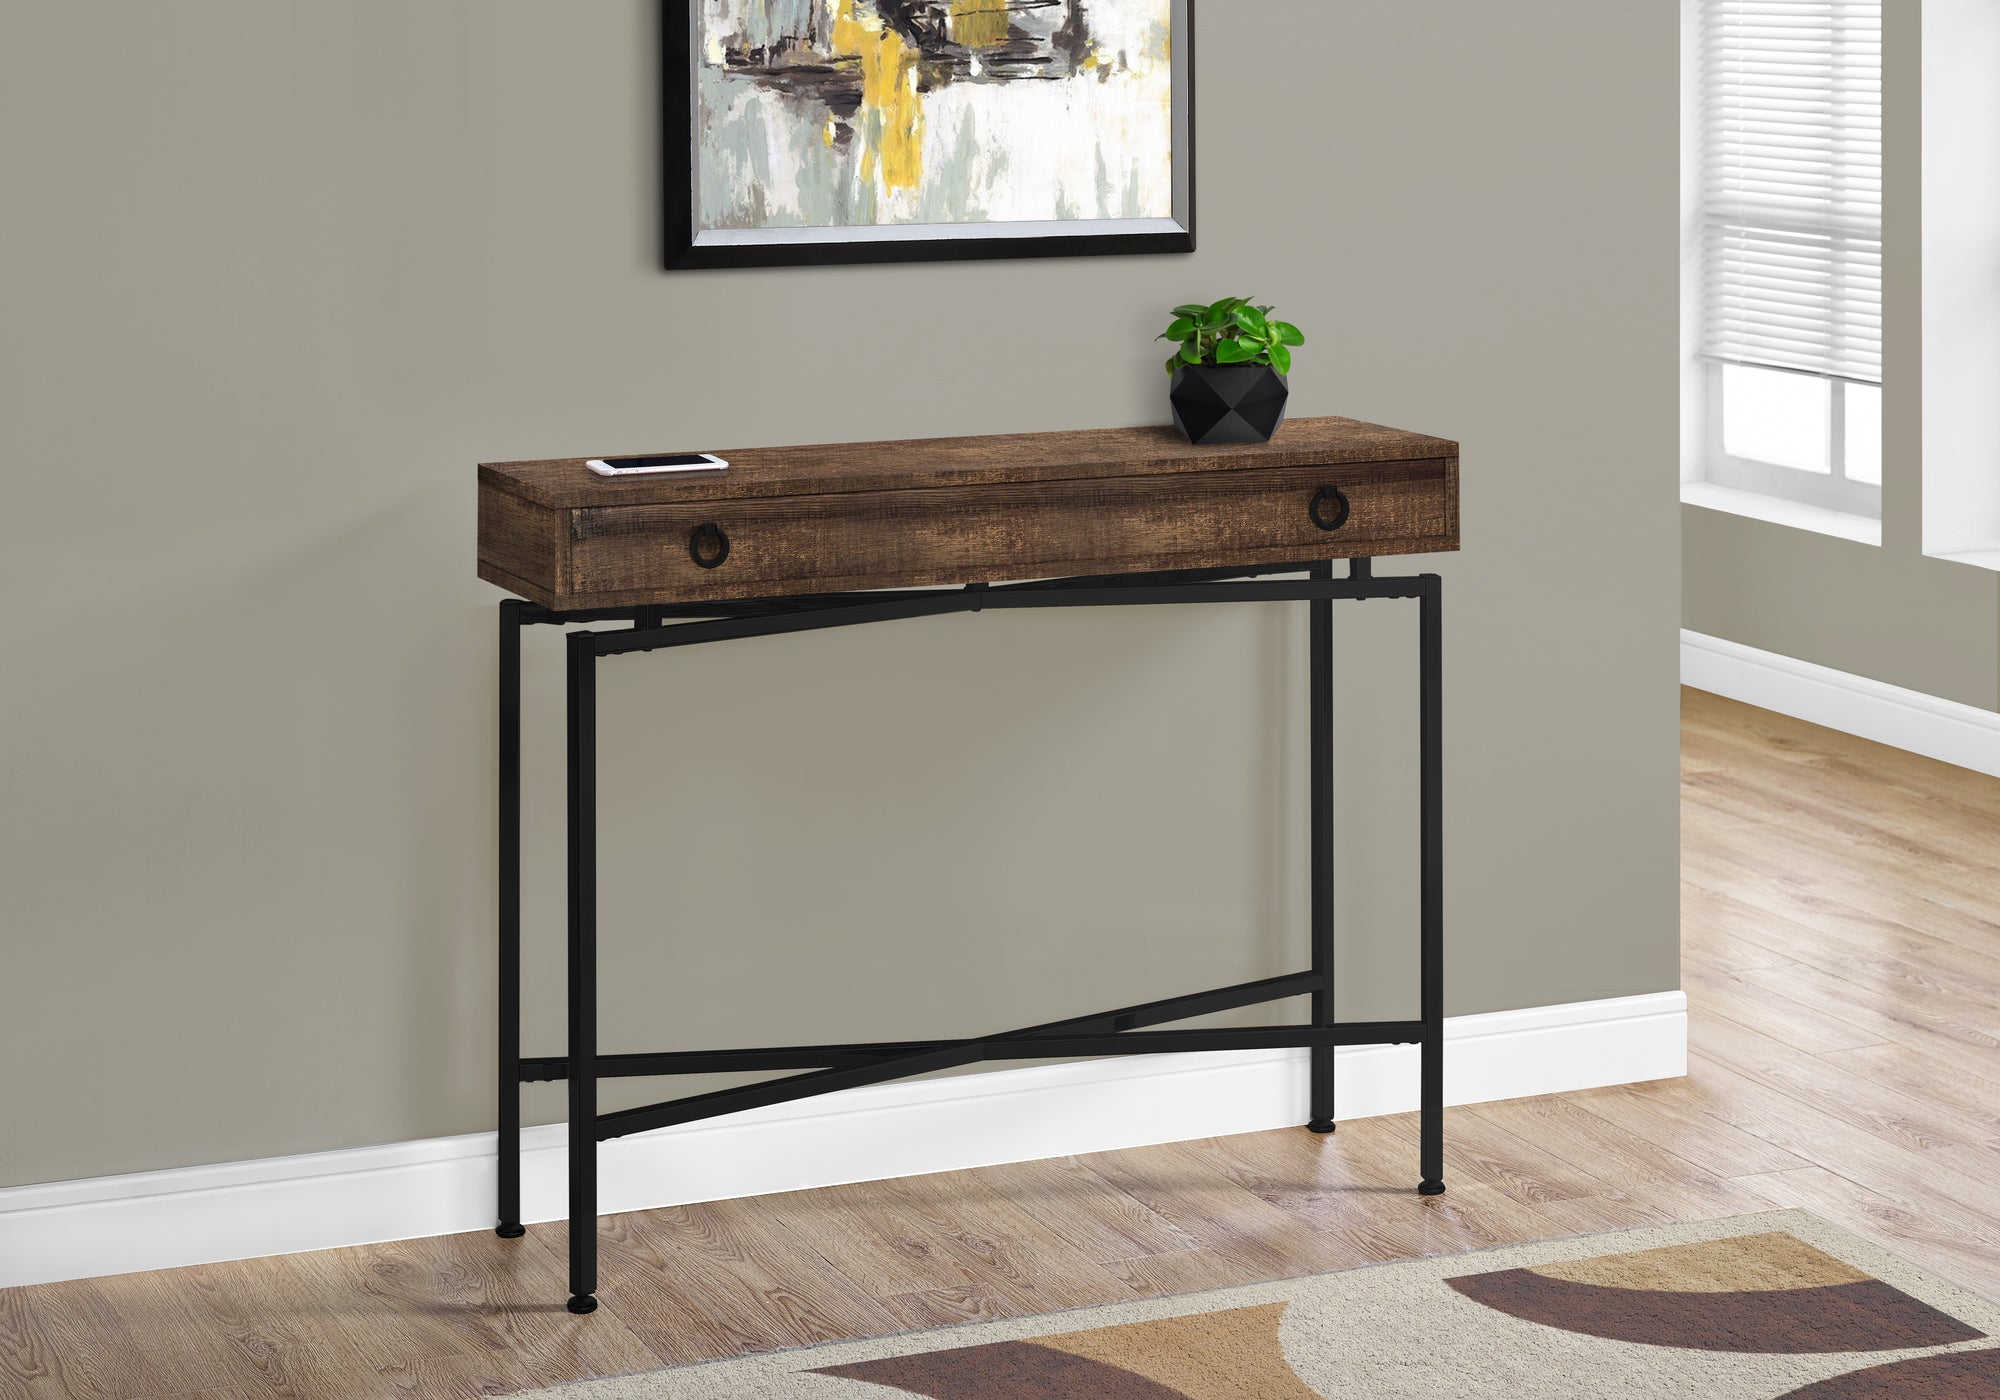 I 3453 - ACCENT TABLE - 42"L / BROWN RECLAIMED WOOD/ BLACK CONSOLE BY MONARCH HOME FURNISHINGS INC